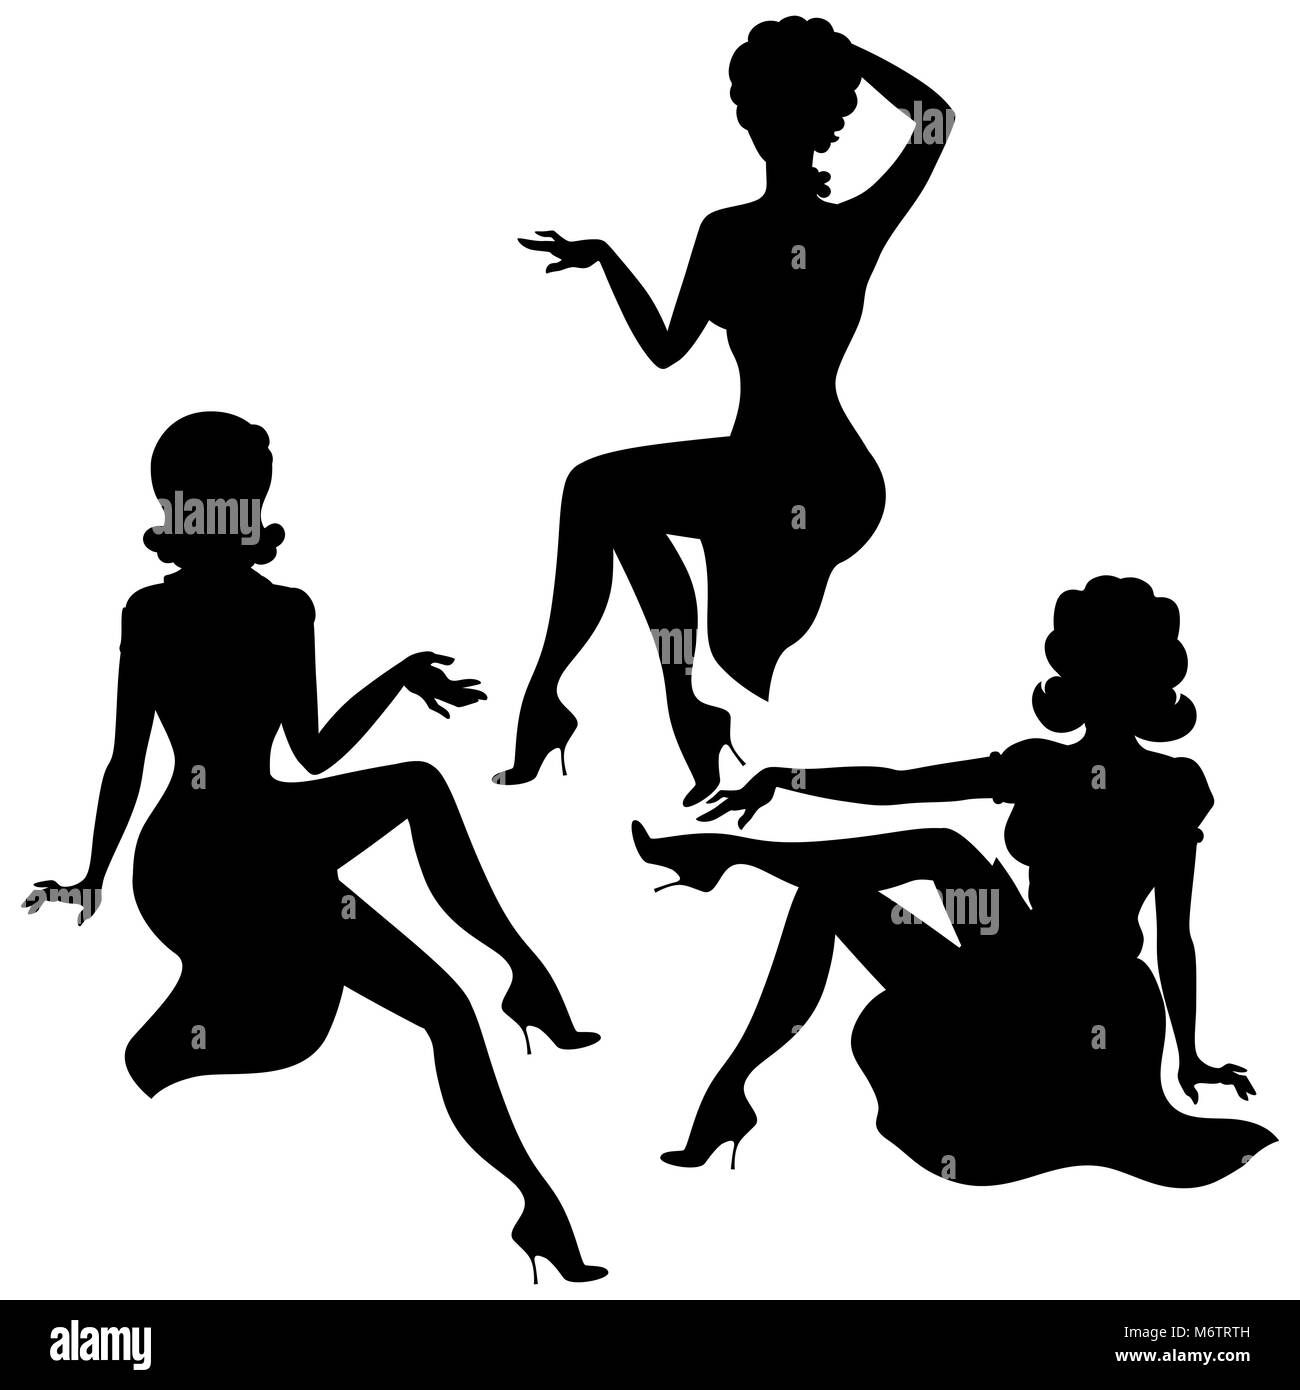 Silhouettes of beautiful pin up girls 1950s style Stock Vector